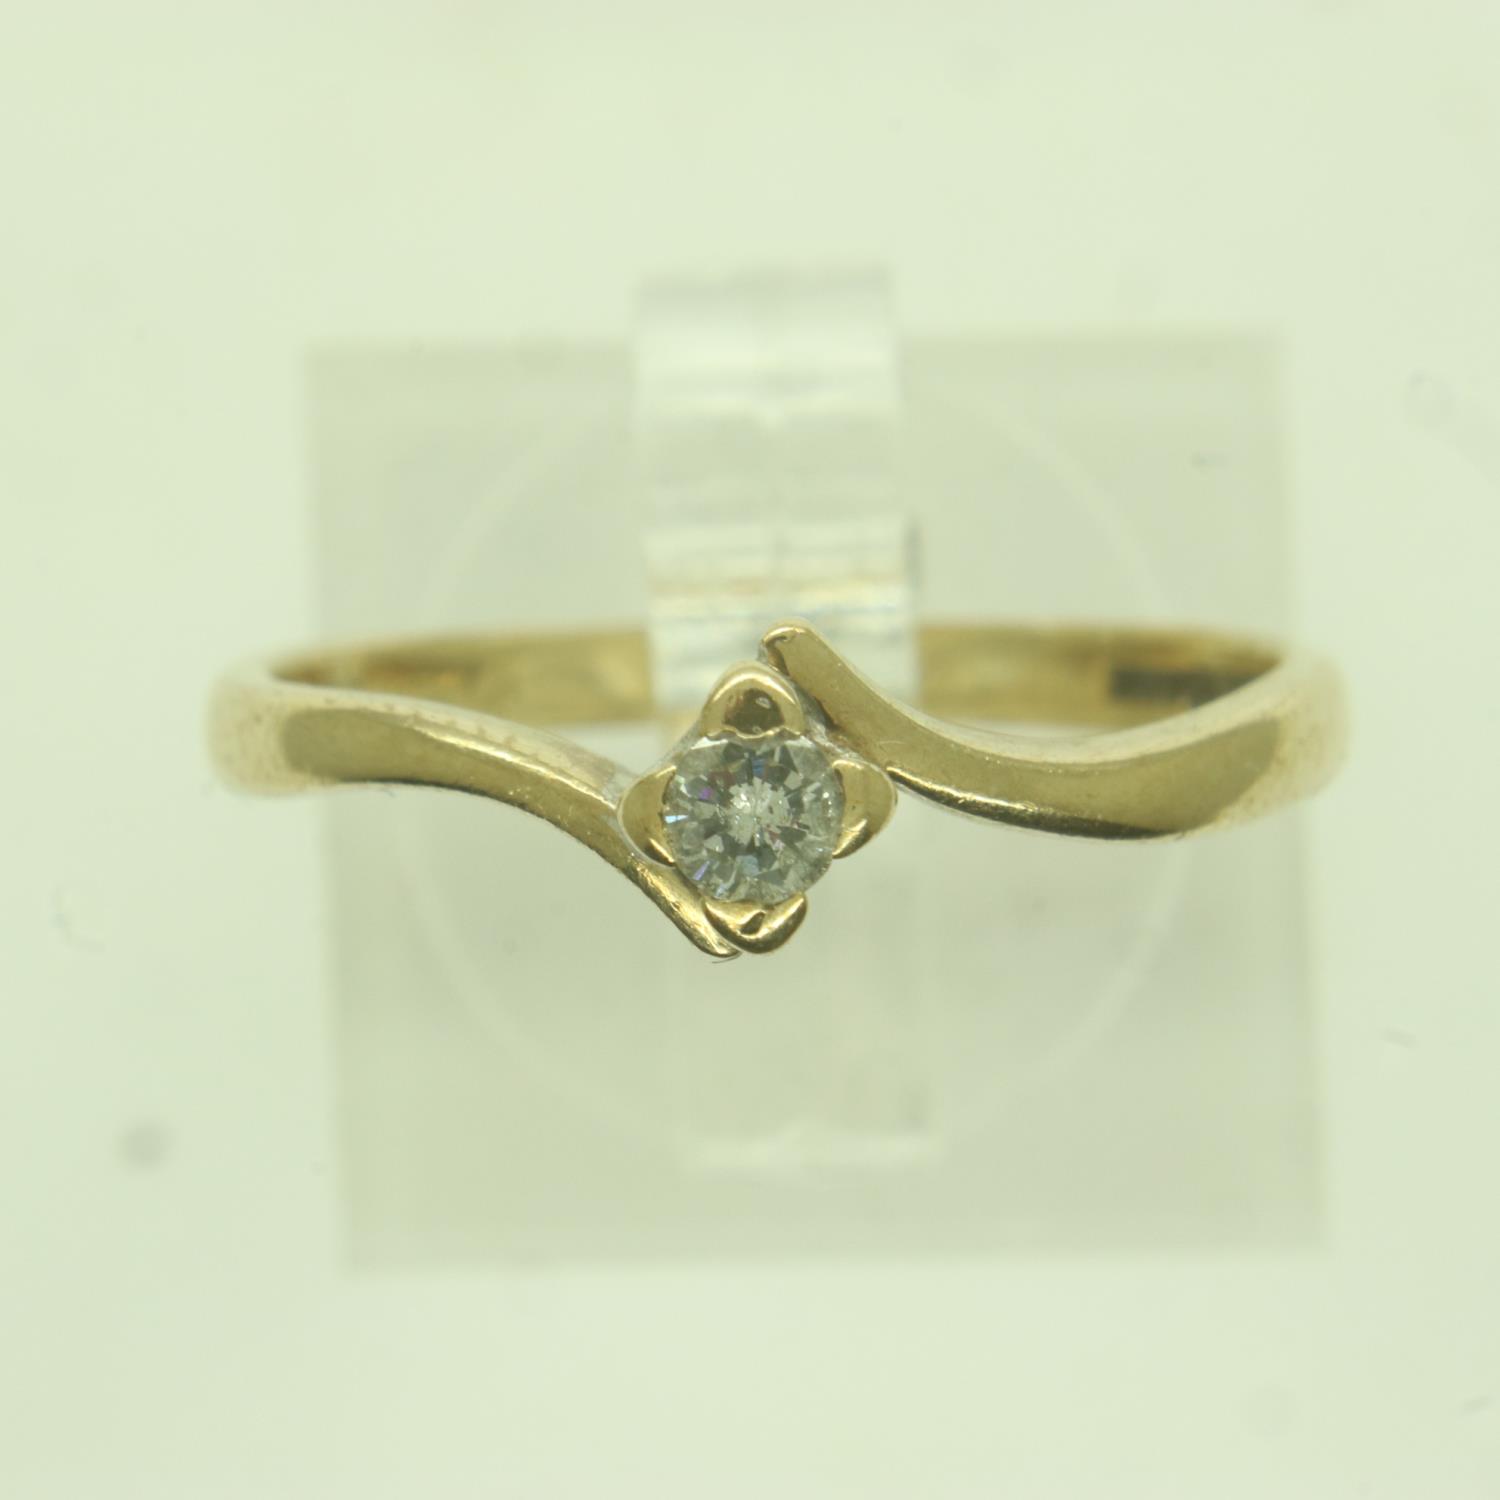 9ct gold diamond set solitaire engagement ring, size N, 1.7g. UK P&P Group 0 (£6+VAT for the first